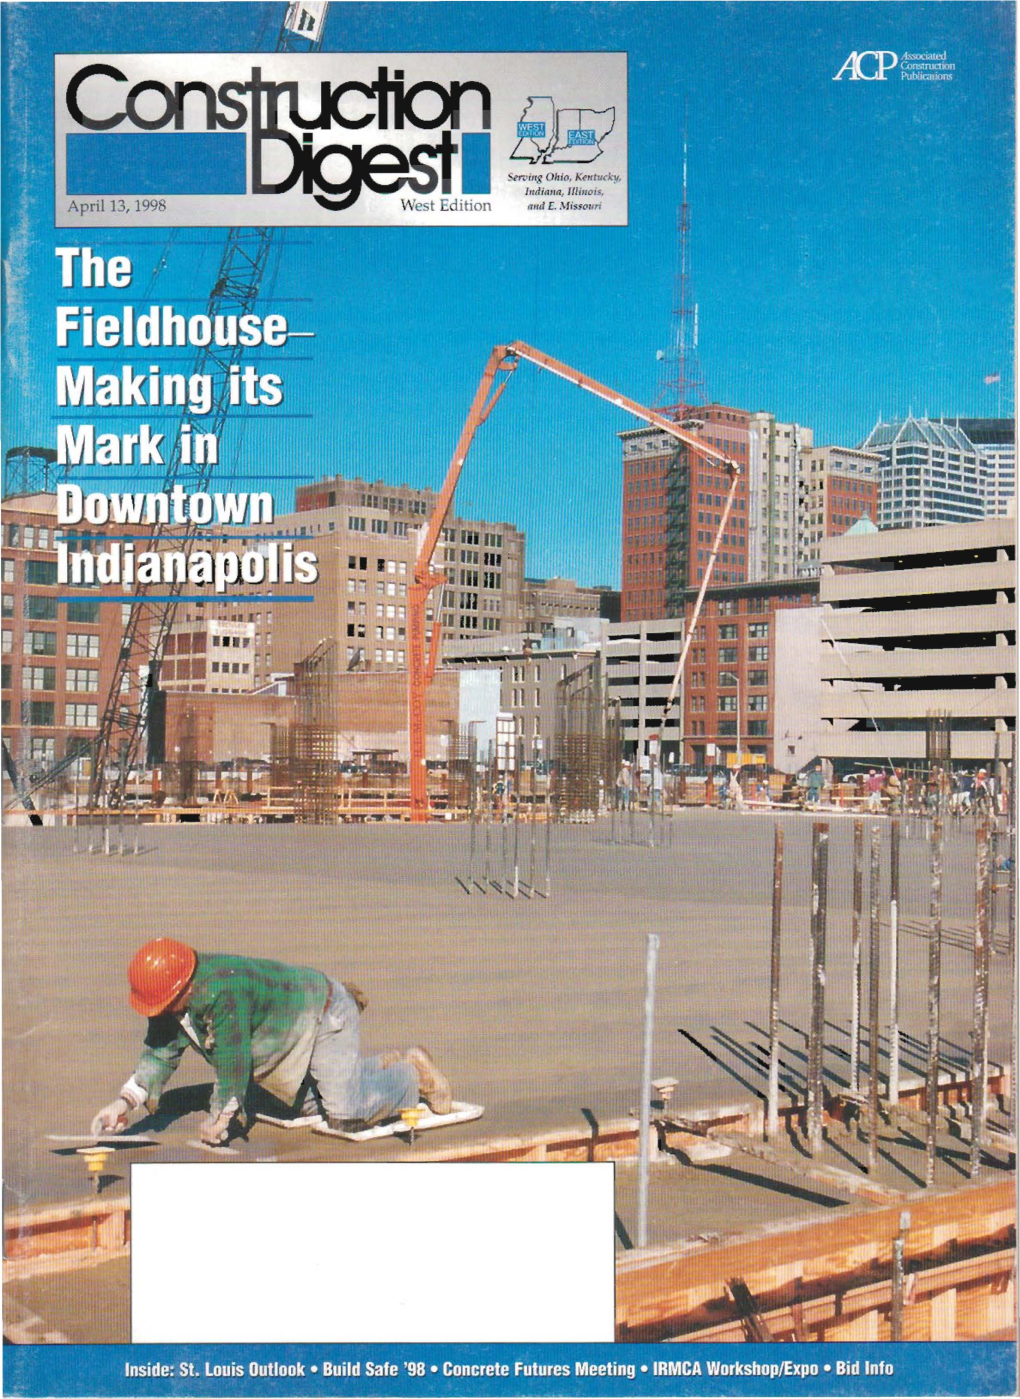 Construction Digest April 1998-Conseco Fieldhouse in Downtown Indianapolis.Pdf